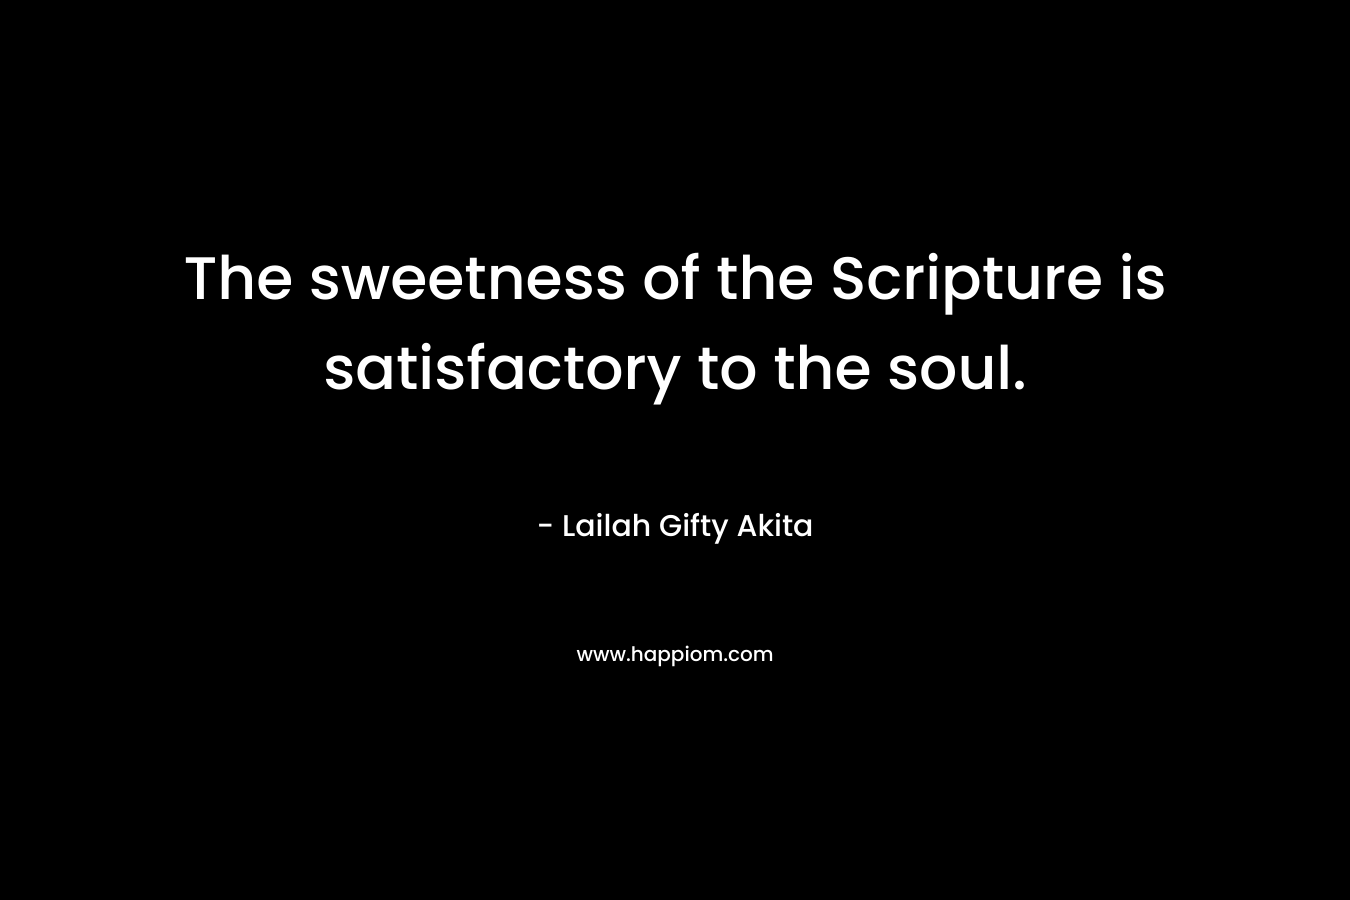 The sweetness of the Scripture is satisfactory to the soul.